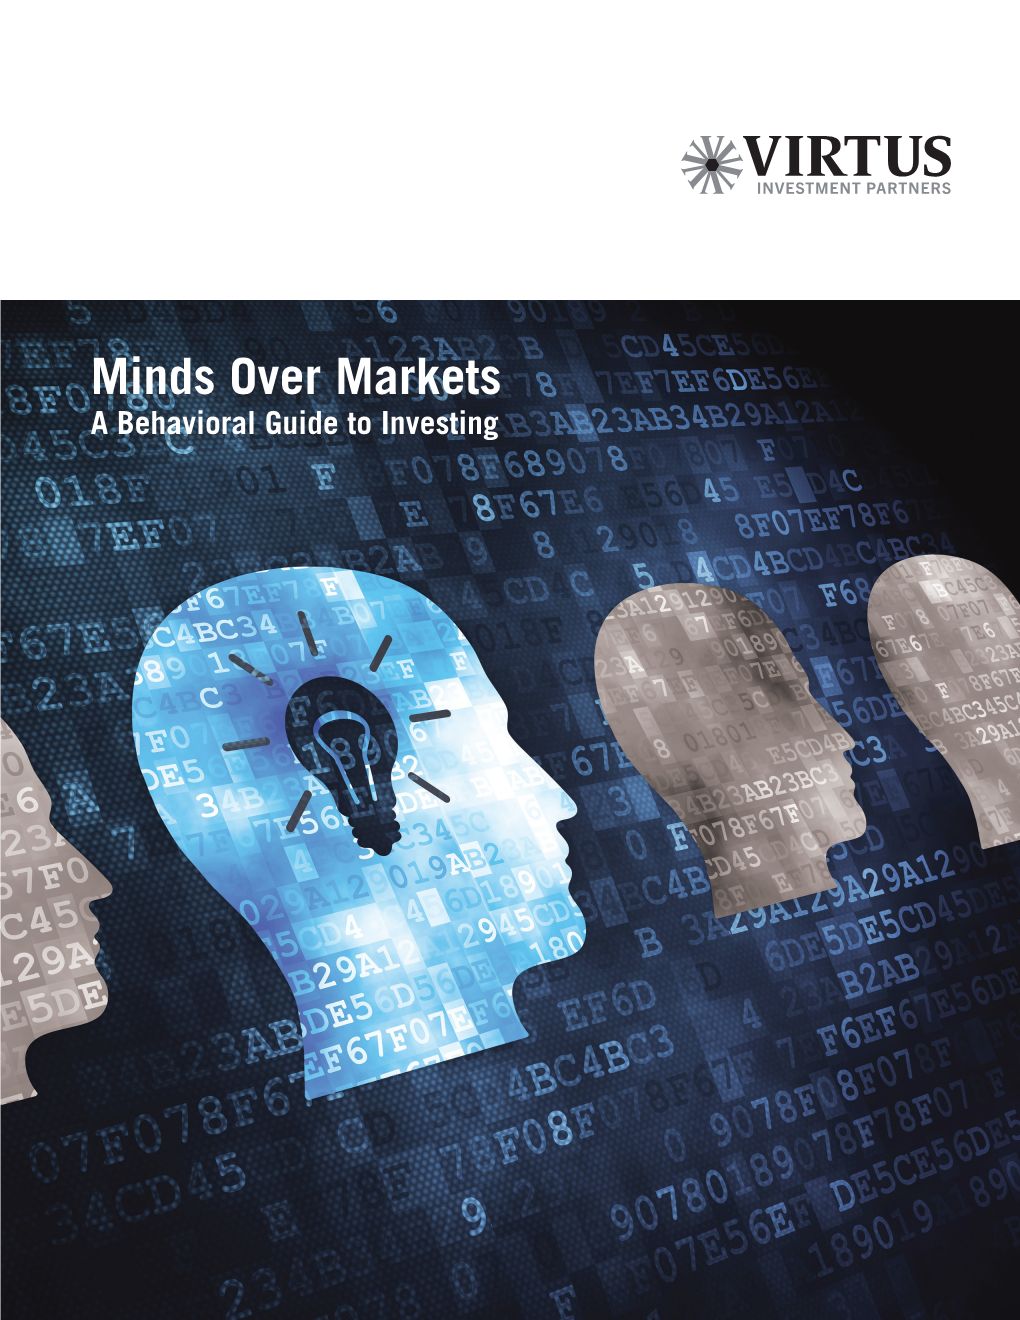 Minds Over Markets a Behavioral Guide to Investing This Guide Strives to Help You Achieve Better Long-Term Financial Outcomes